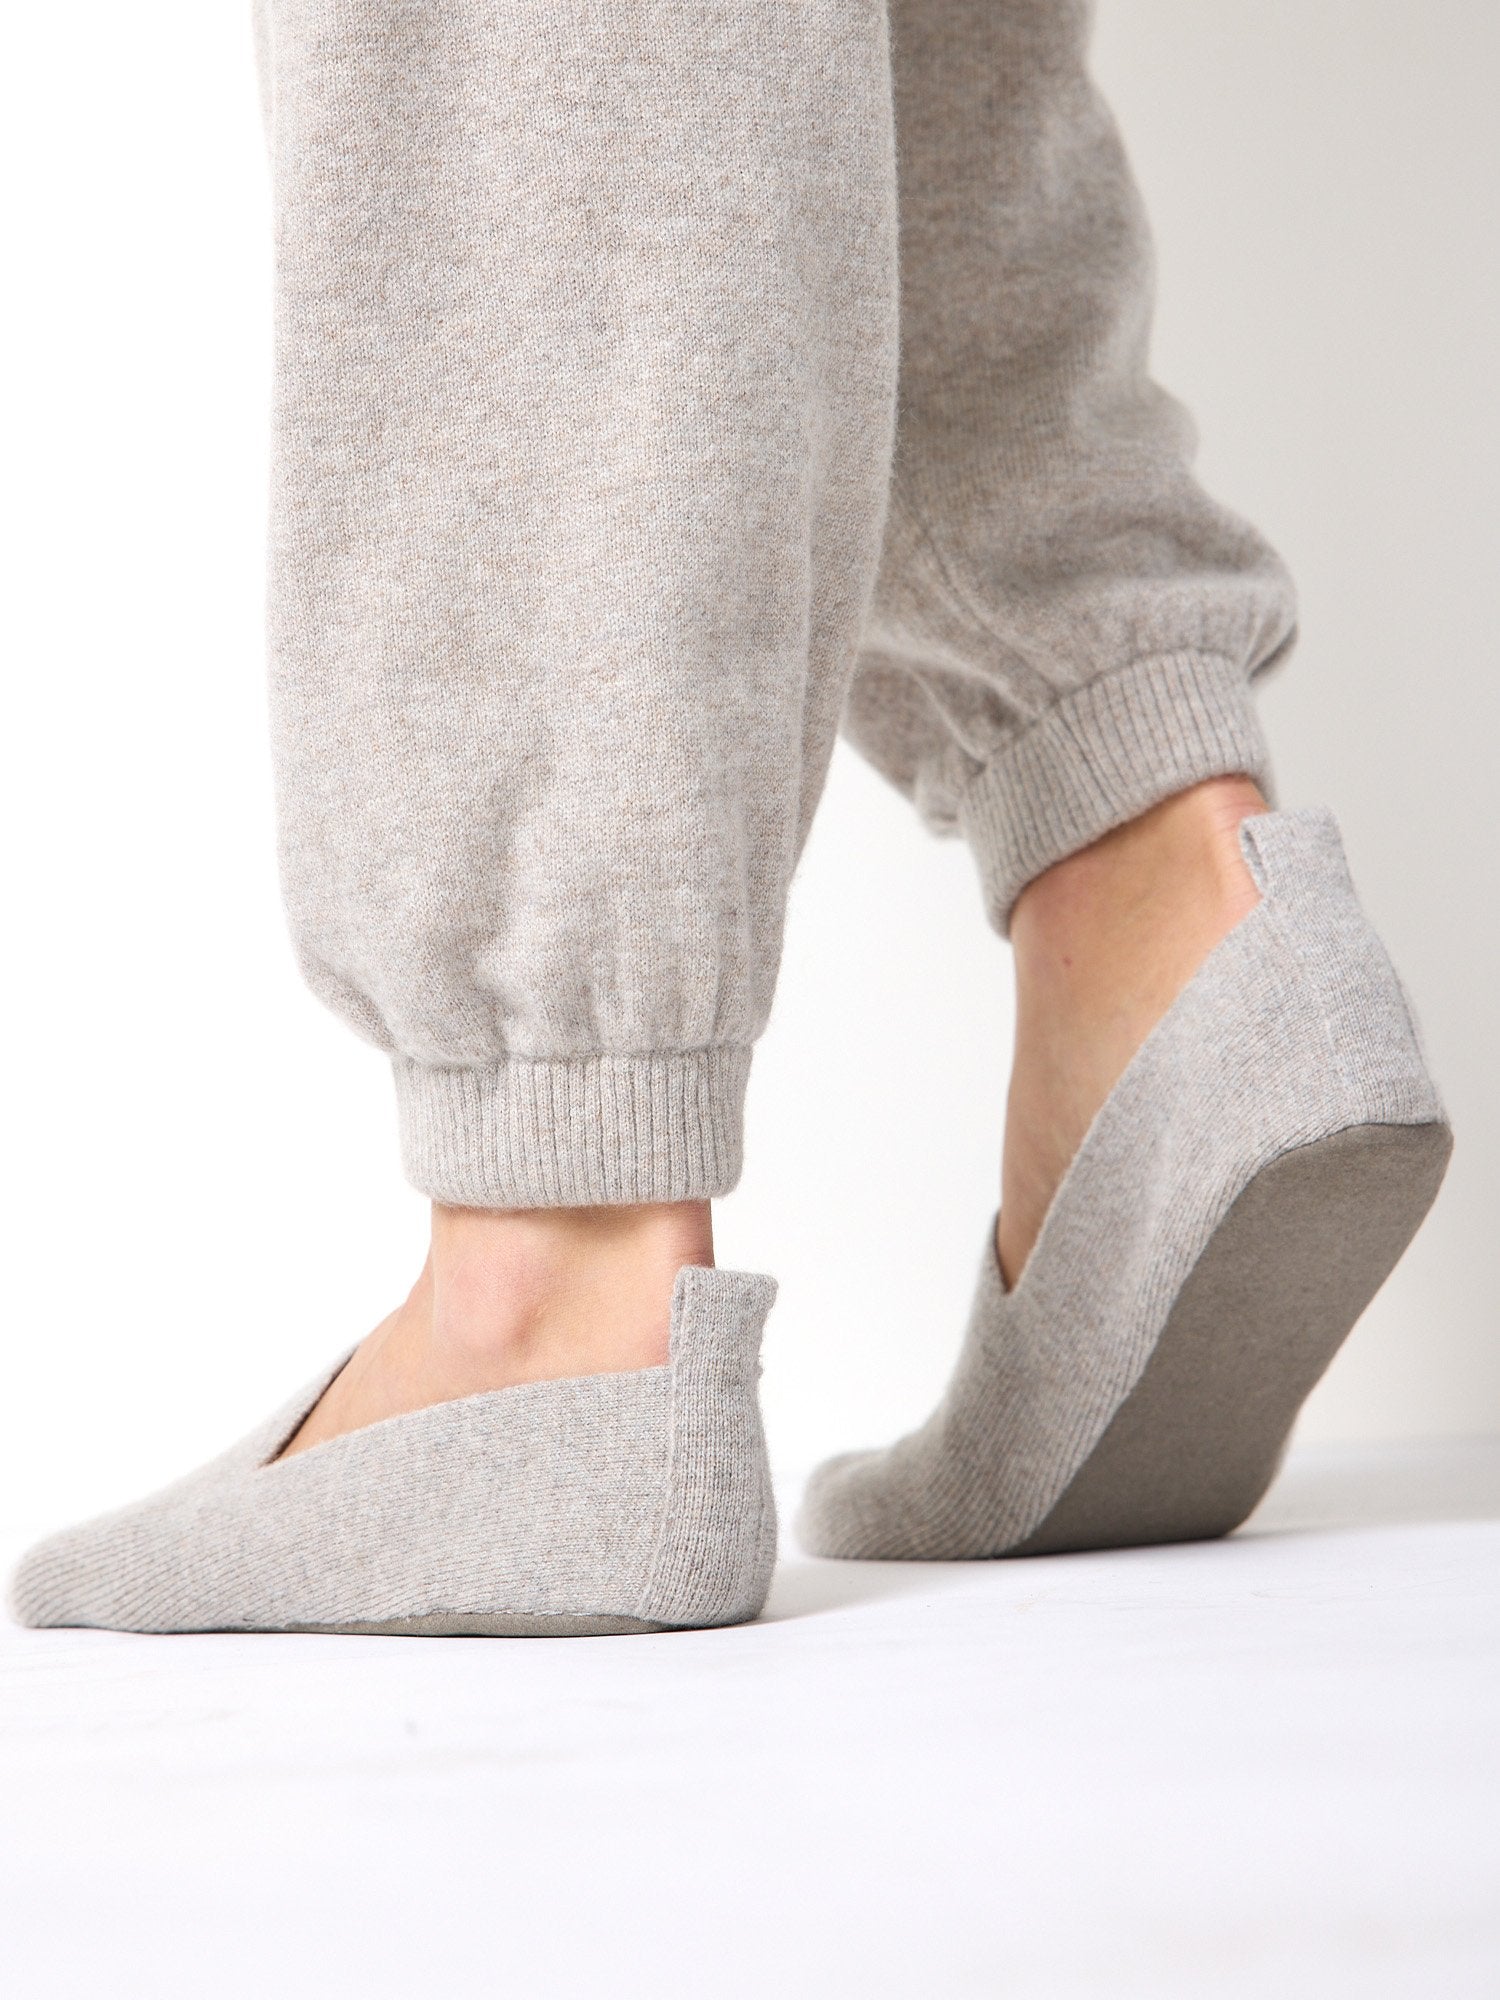 The Luxe Slipper Socks with Vegan Suede